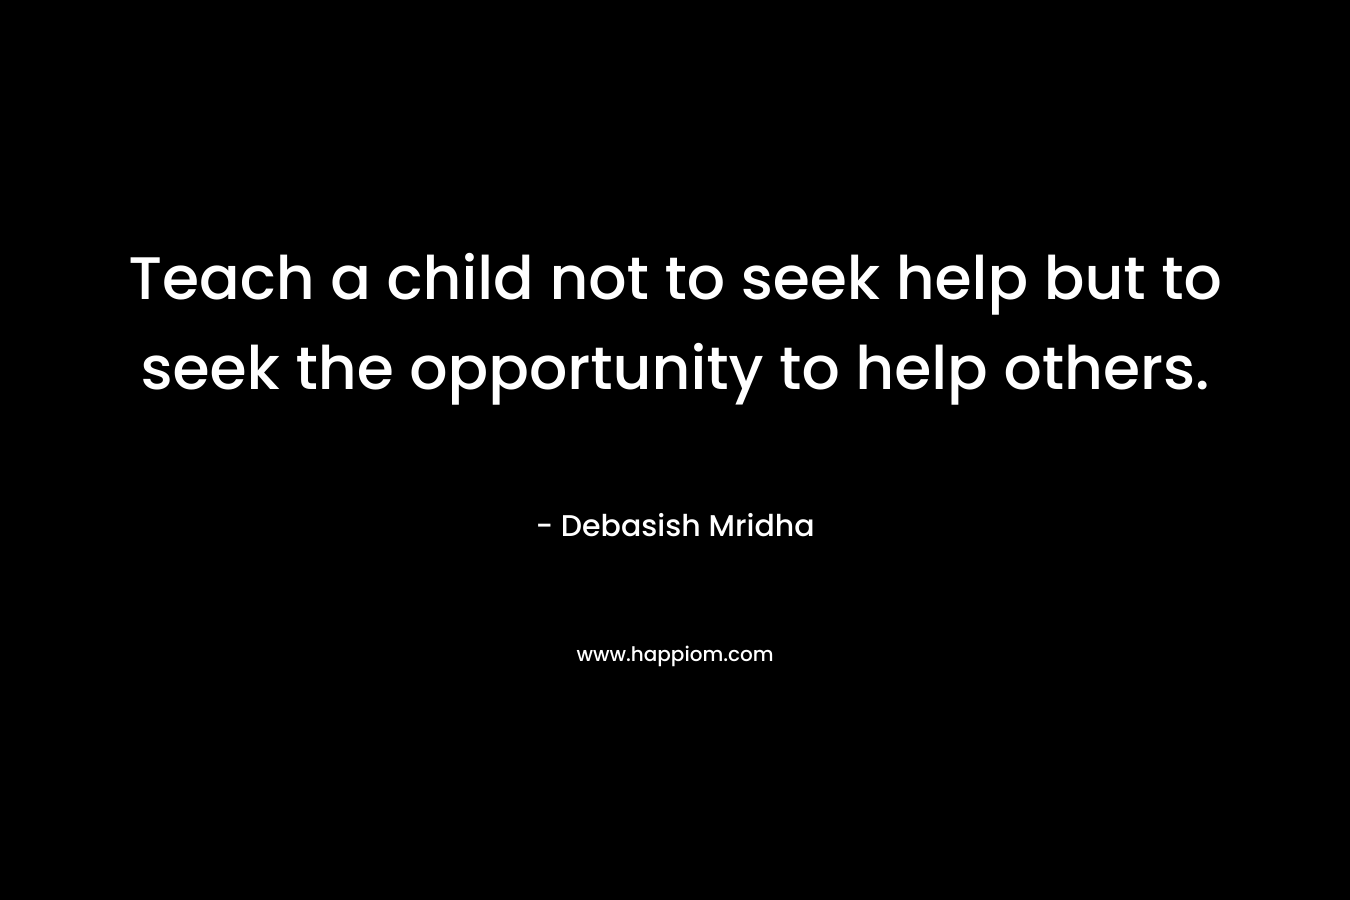 Teach a child not to seek help but to seek the opportunity to help others.